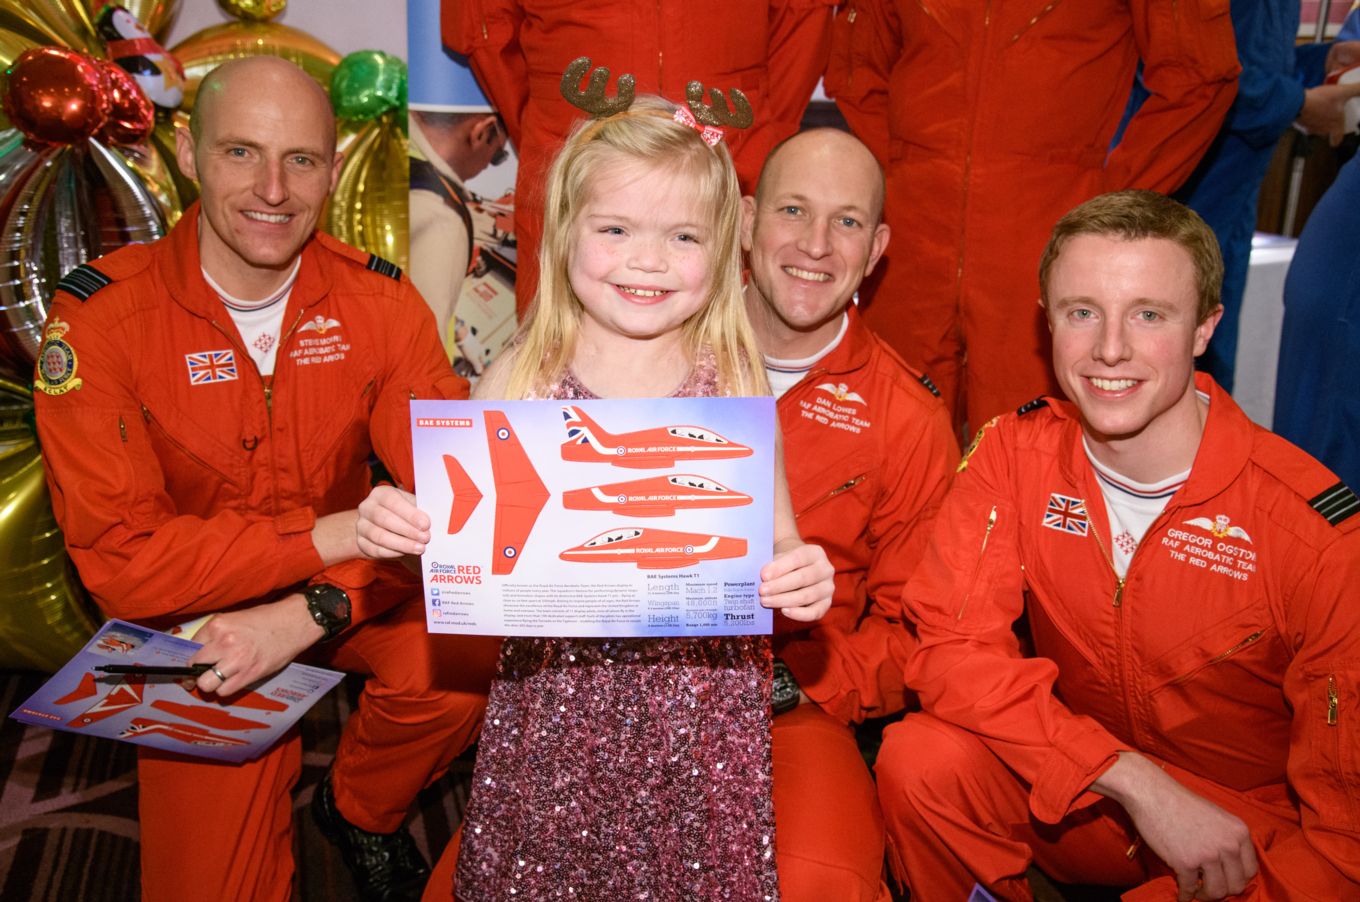 The Red Arrows meet children as part of an event with Great Ormond Street Hospital